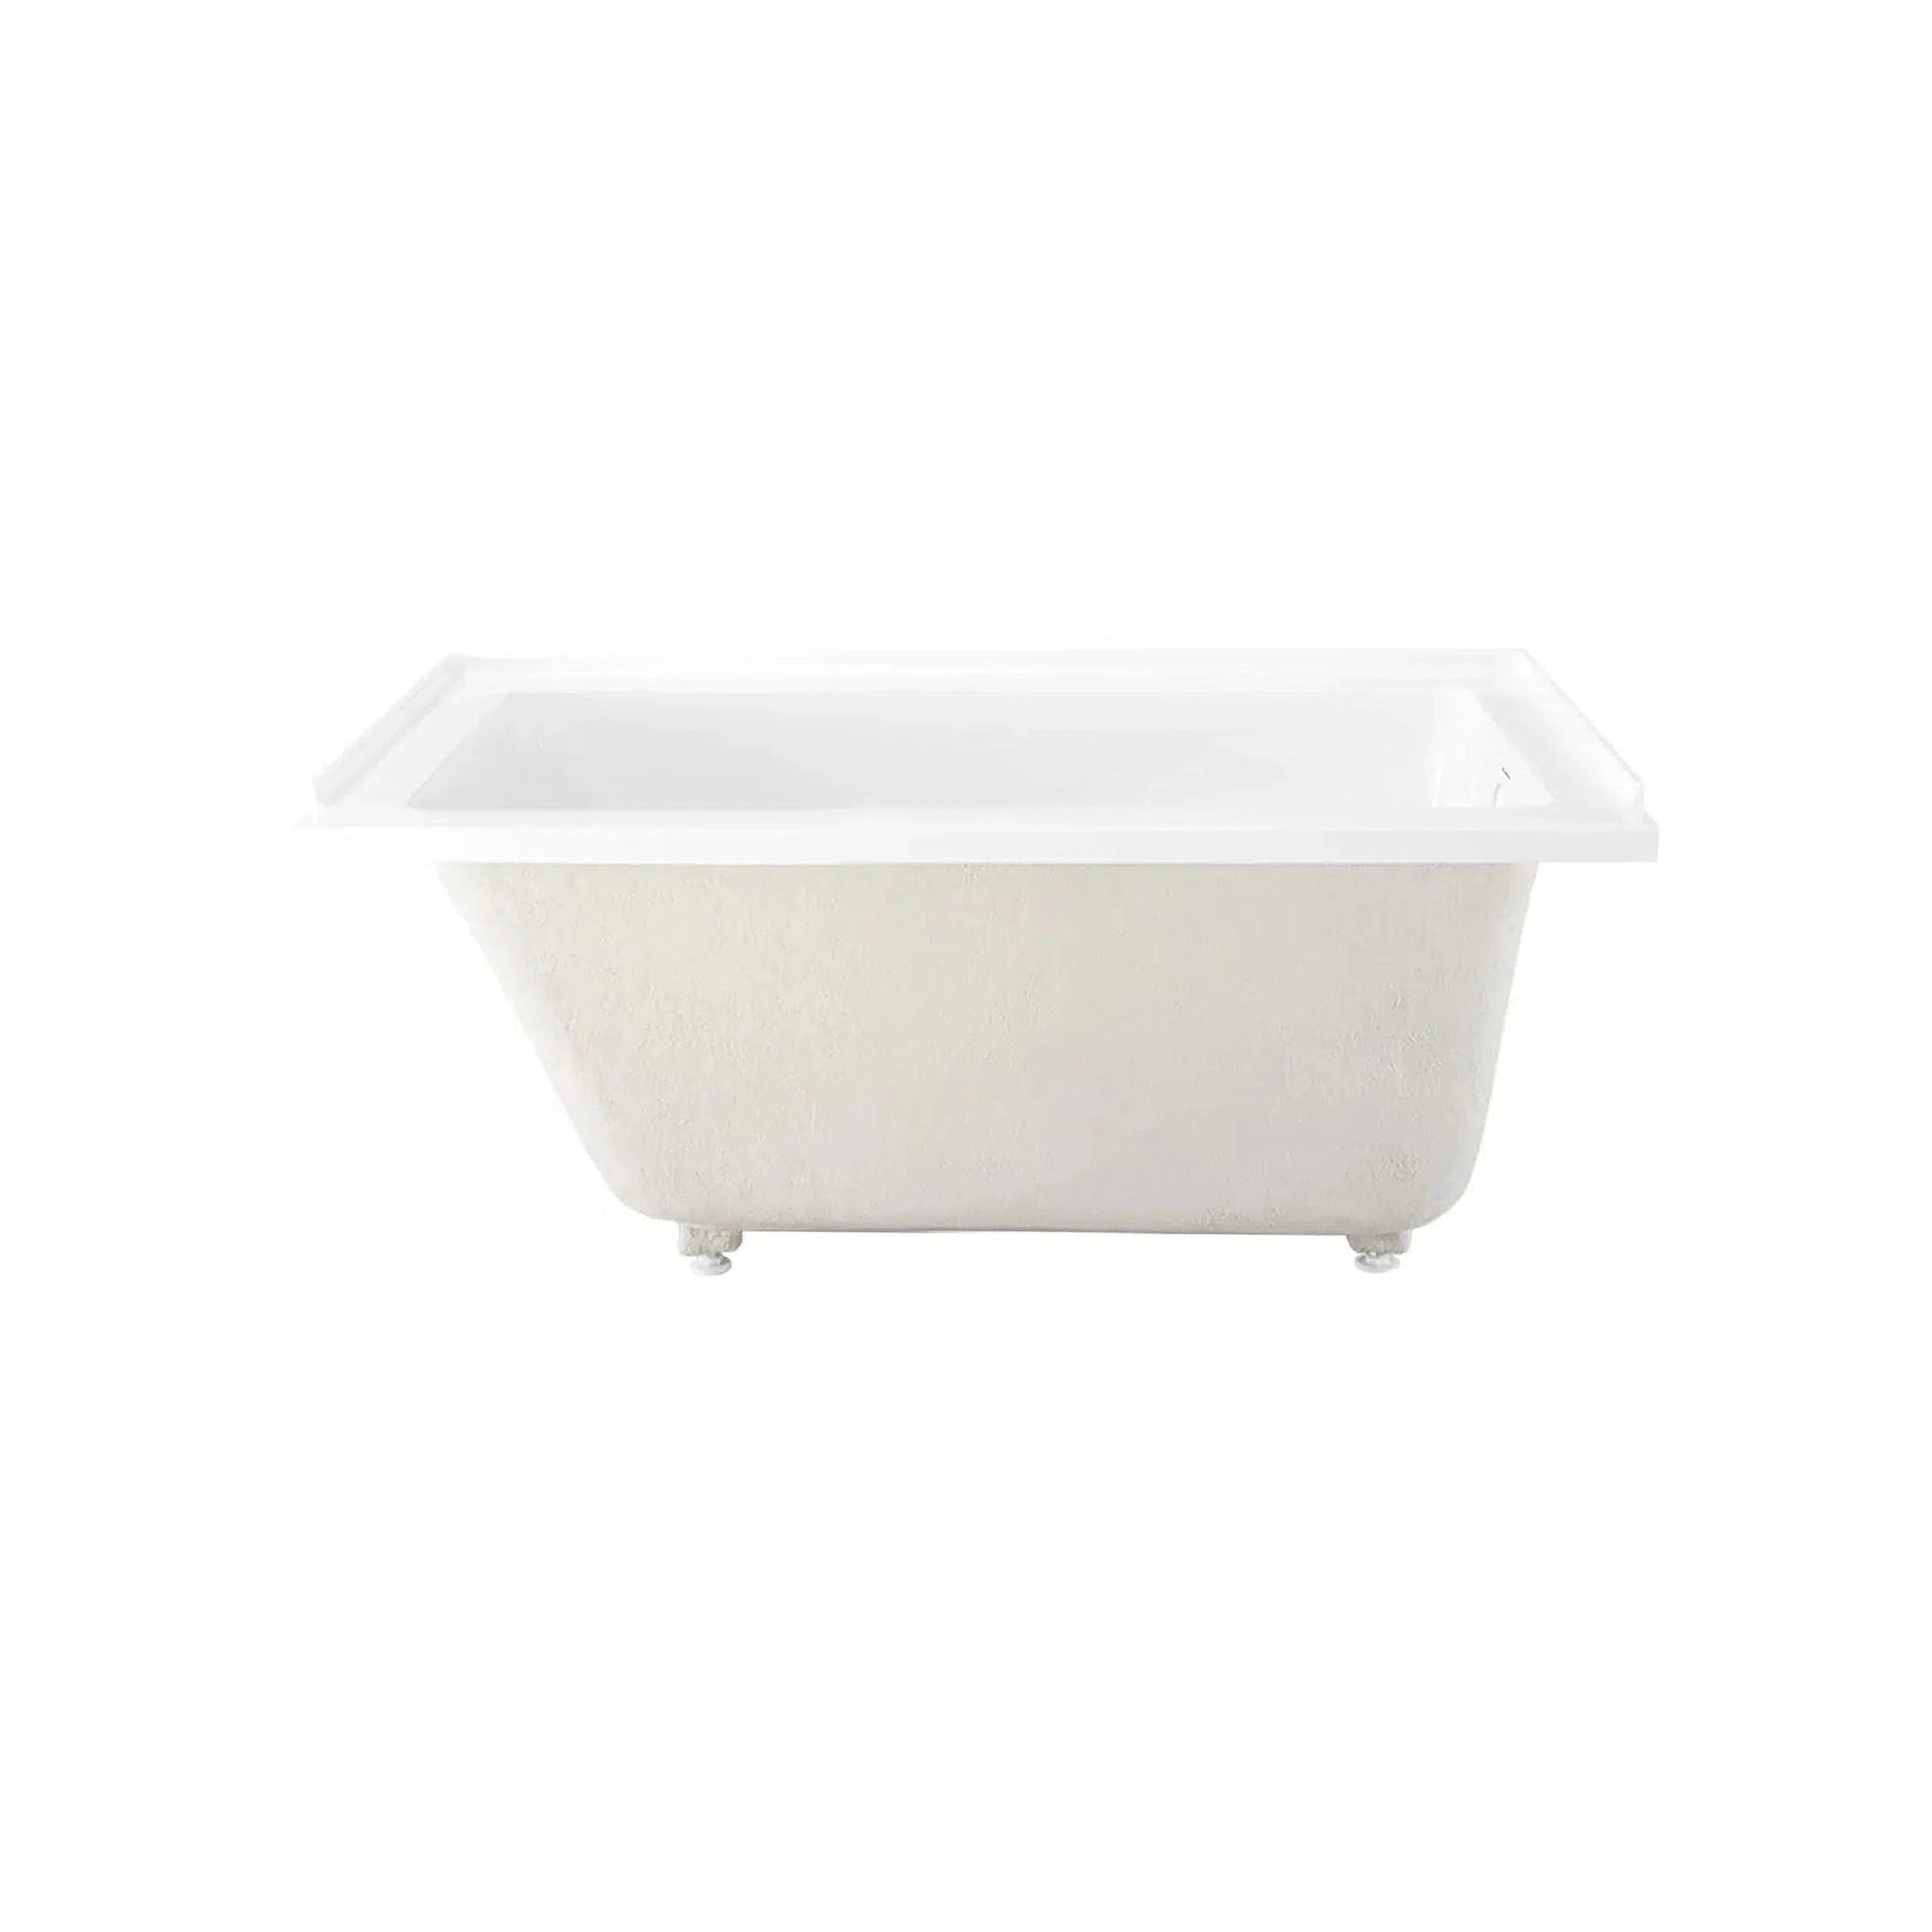 Swiss Madison Voltaire 54" x 30" Glossy White Right-Hand Drain Alcove Bathtub With Built-In Flange & Adjustable Feet